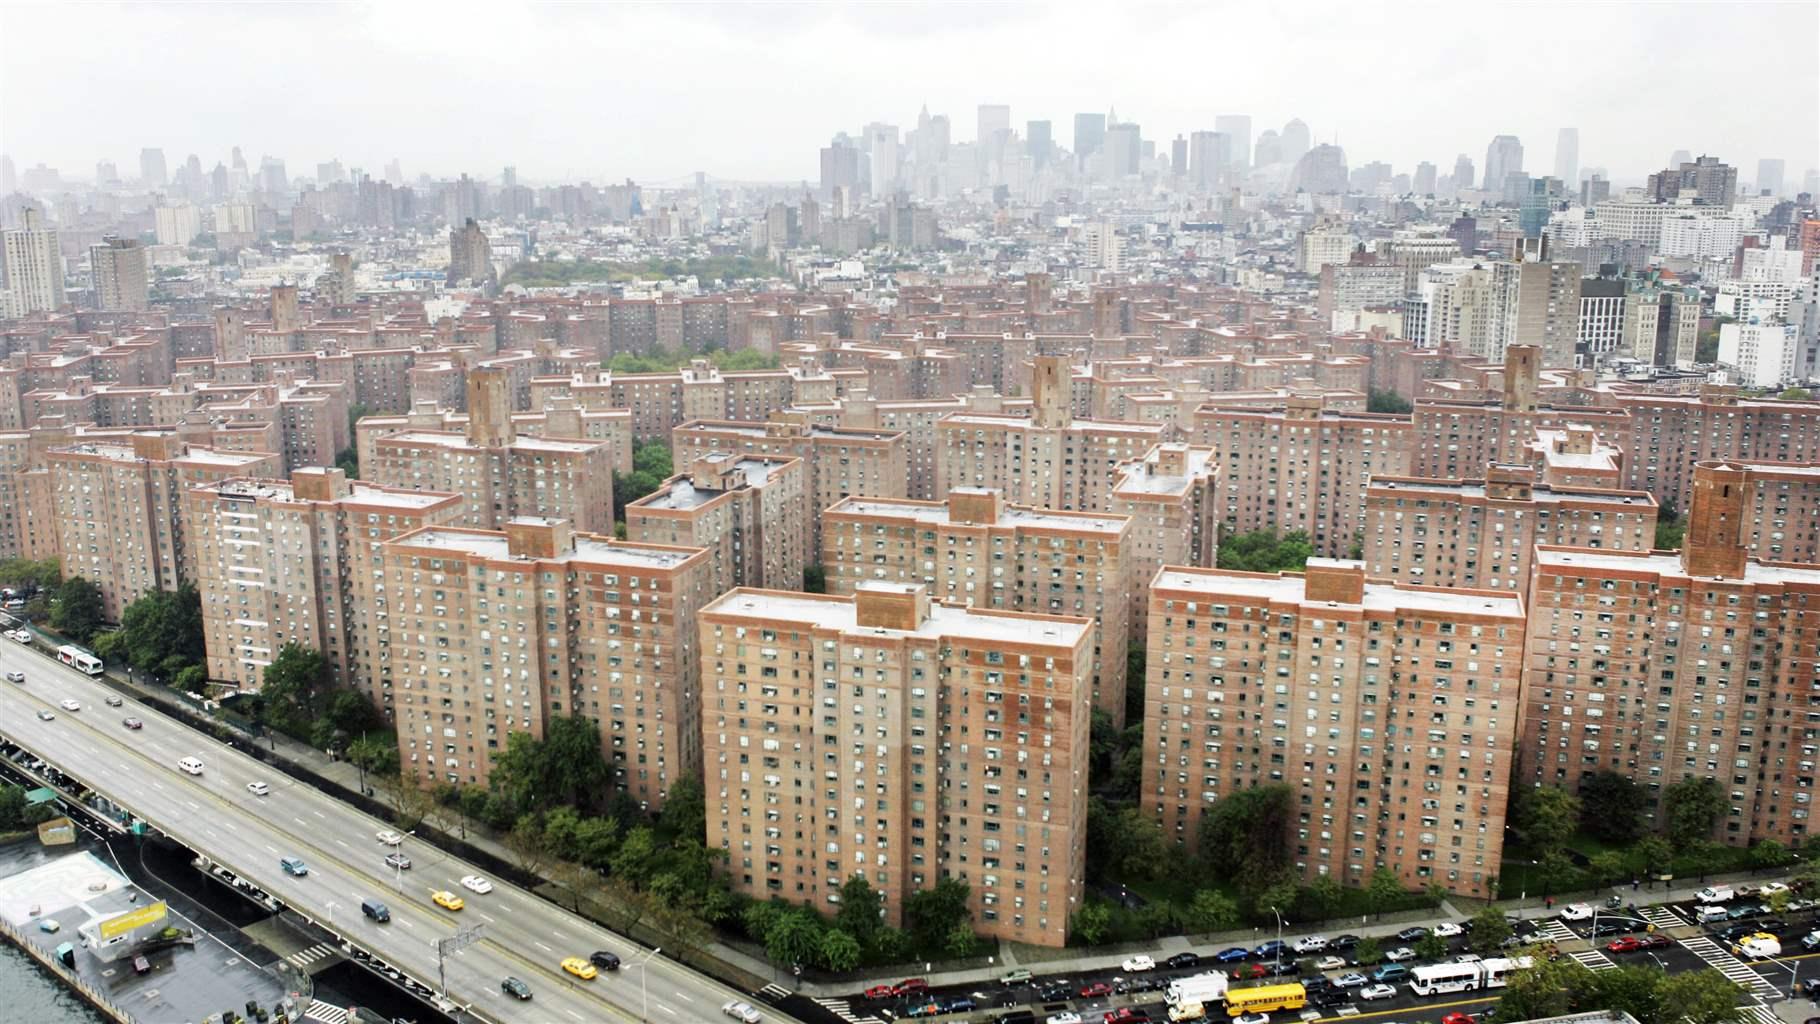 In this Oct. 17, 2006 file photo, the Peter Cooper Village and Stuyvesant Town apartment complex, an enclave of 110 buildings on Manhattan's East Side, is seen in New York.